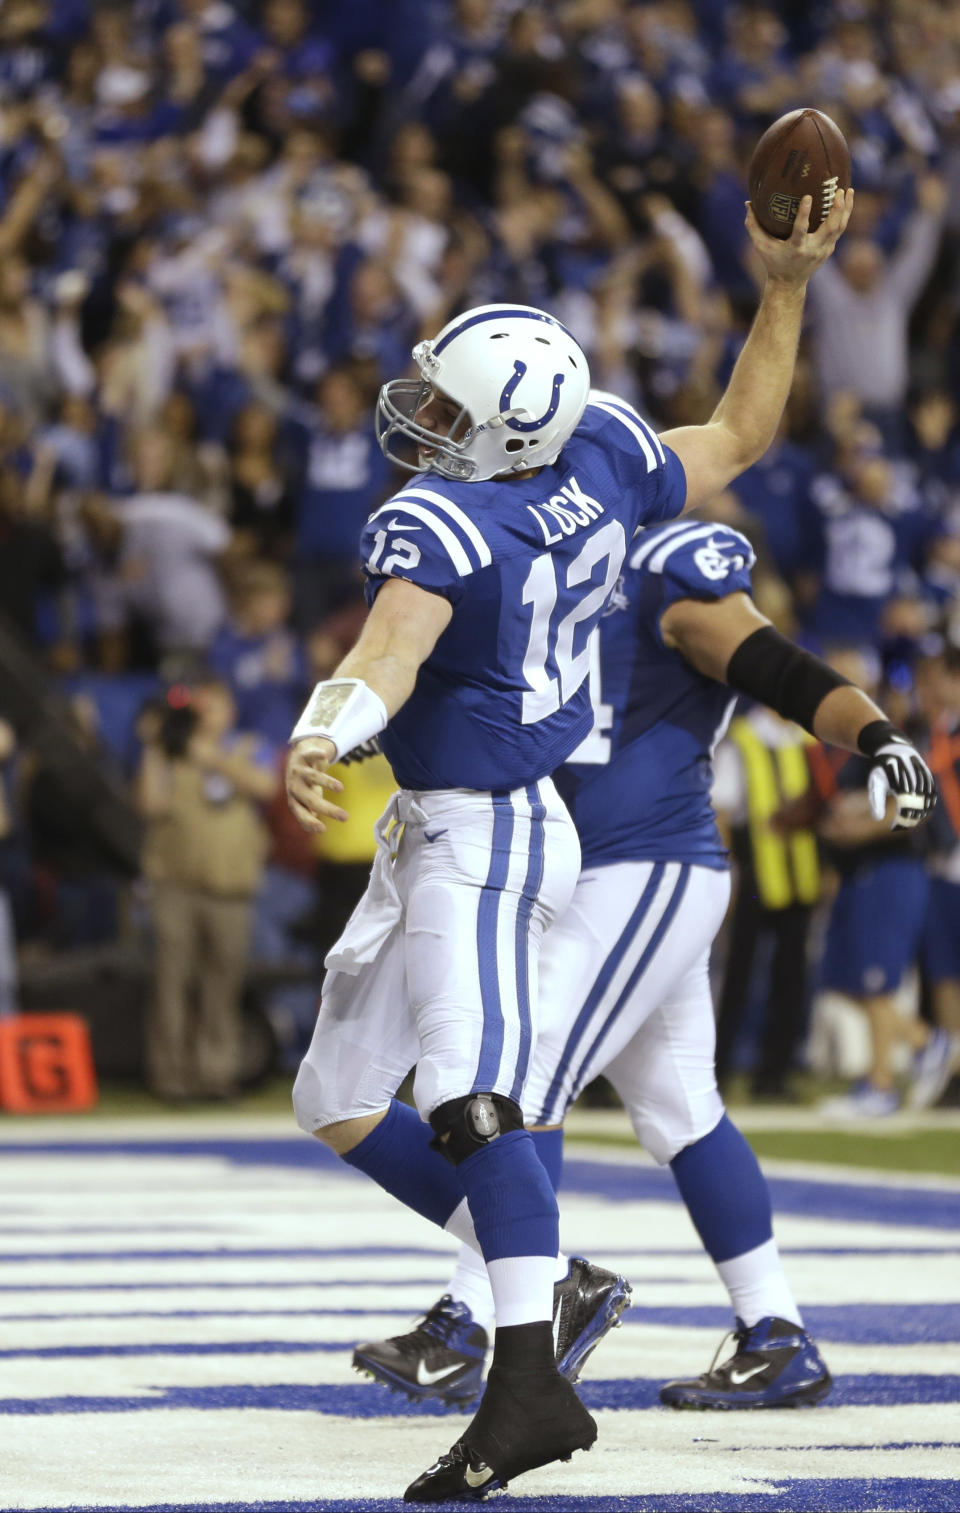 Indianapolis Colts quarterback Andrew Luck (12) celebrates after scoring a touchdown against the Kansas City Chiefs during the second half of an NFL wild-card playoff football game Saturday, Jan. 4, 2014, in Indianapolis. (AP Photo/Michael Conroy)